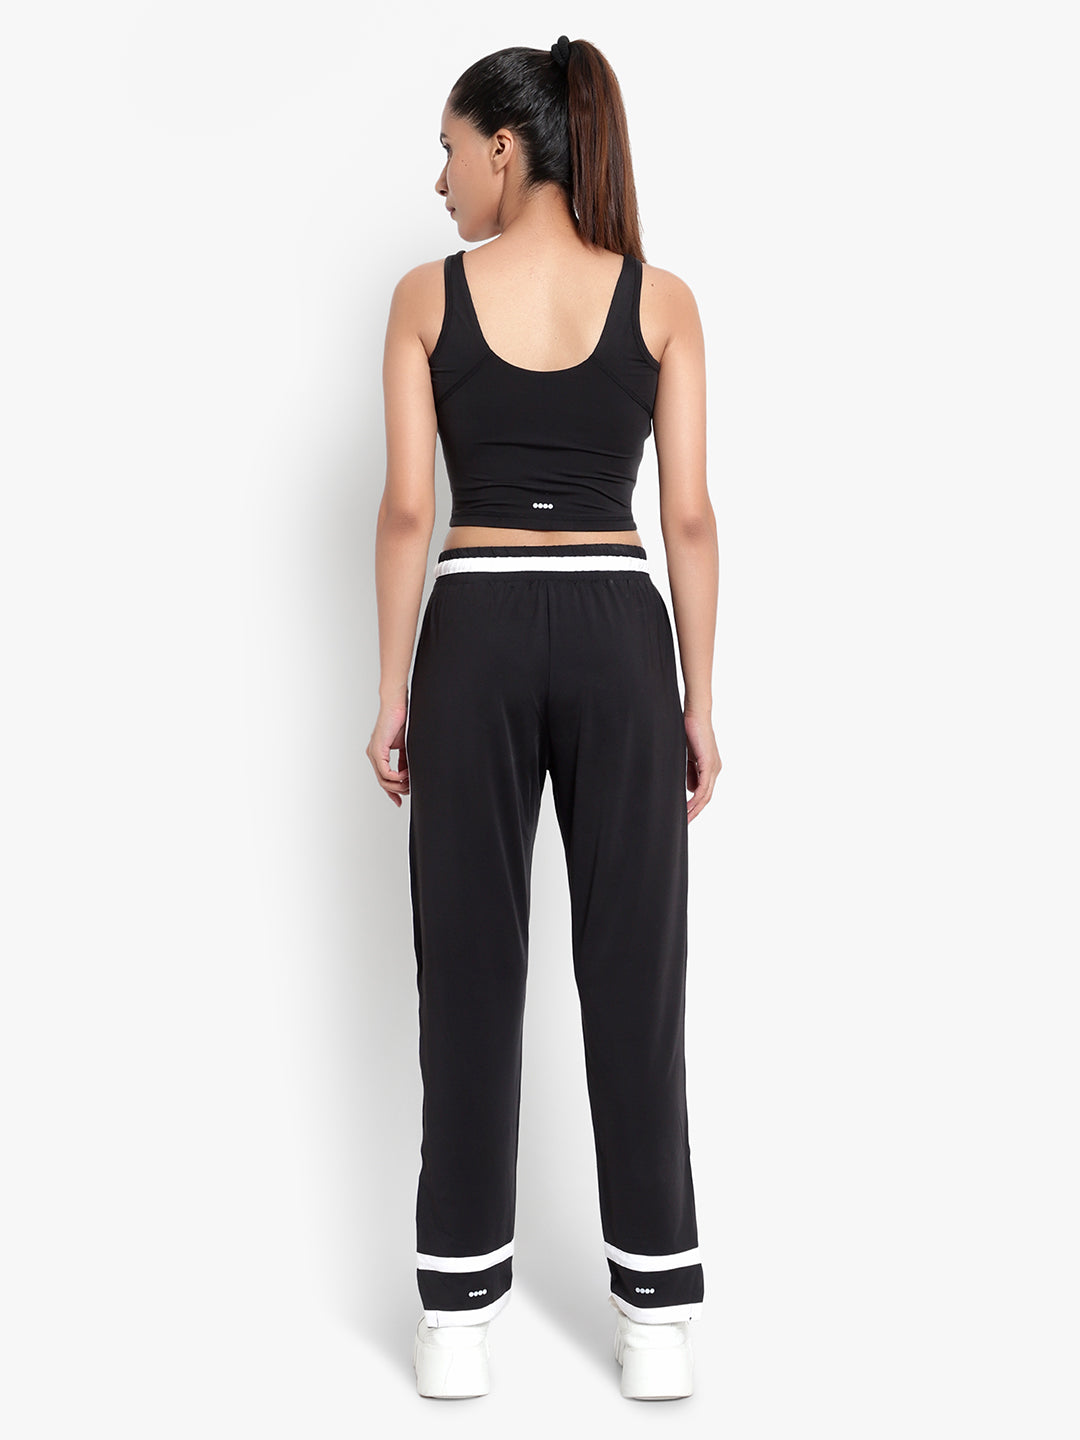 Axis Tank Top & Track Pant - Black